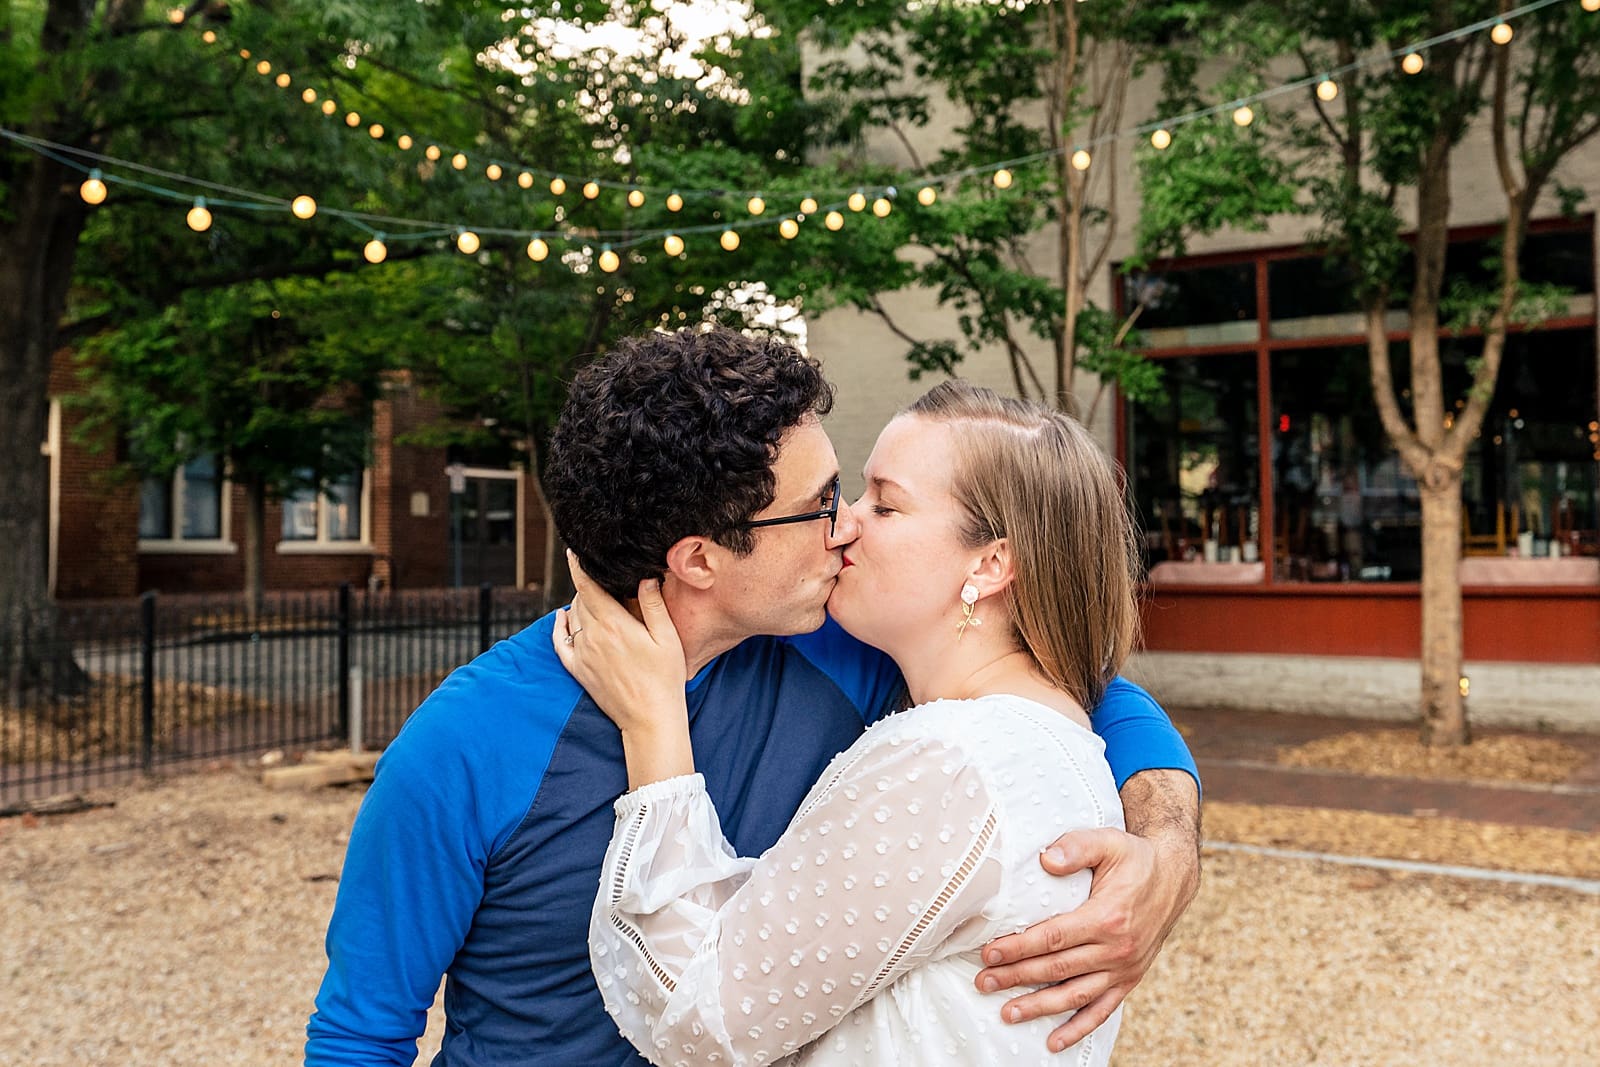 City Market Engagement Photos - couple laughs and walks through City Market in downtown Raleigh